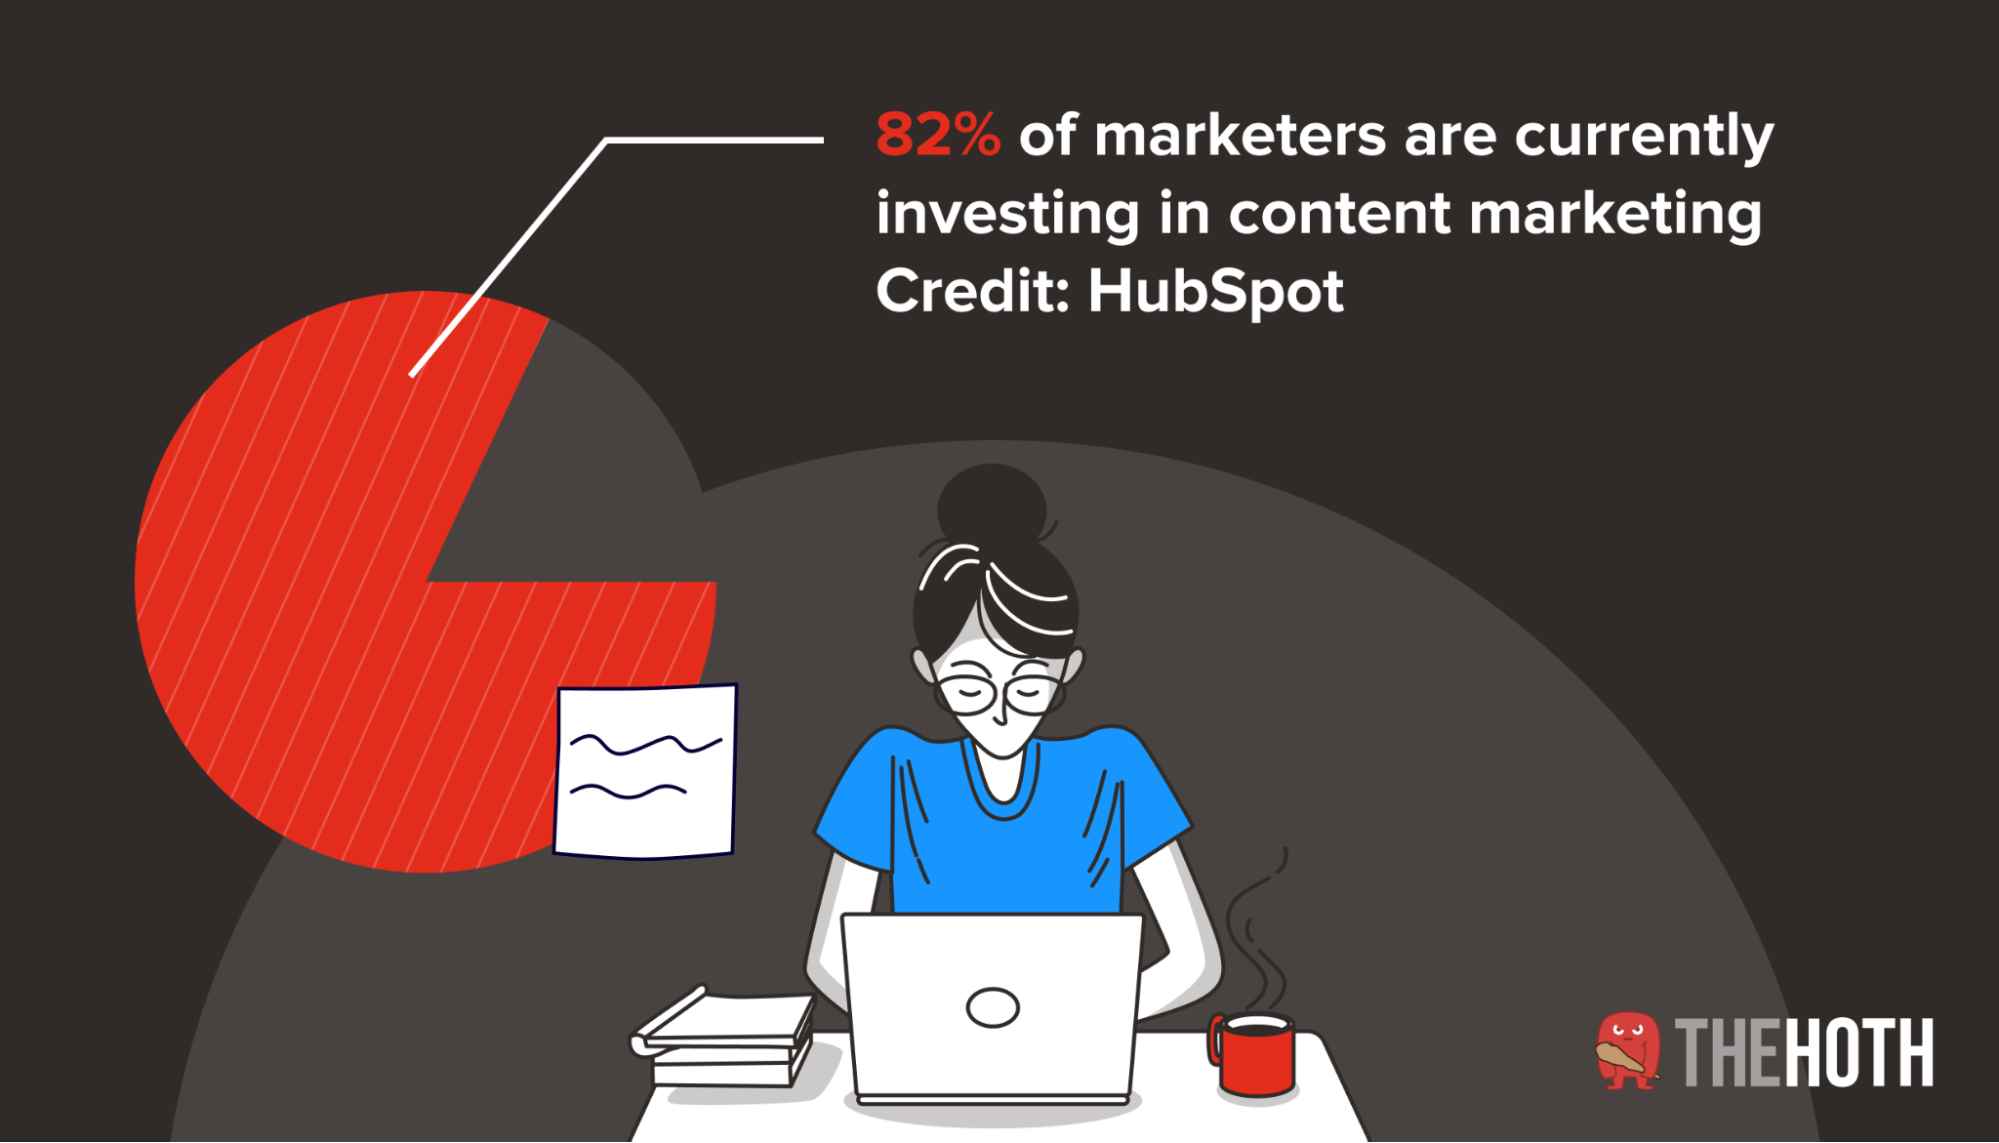 A statistic showing the number of marketers currently investing in content marketing